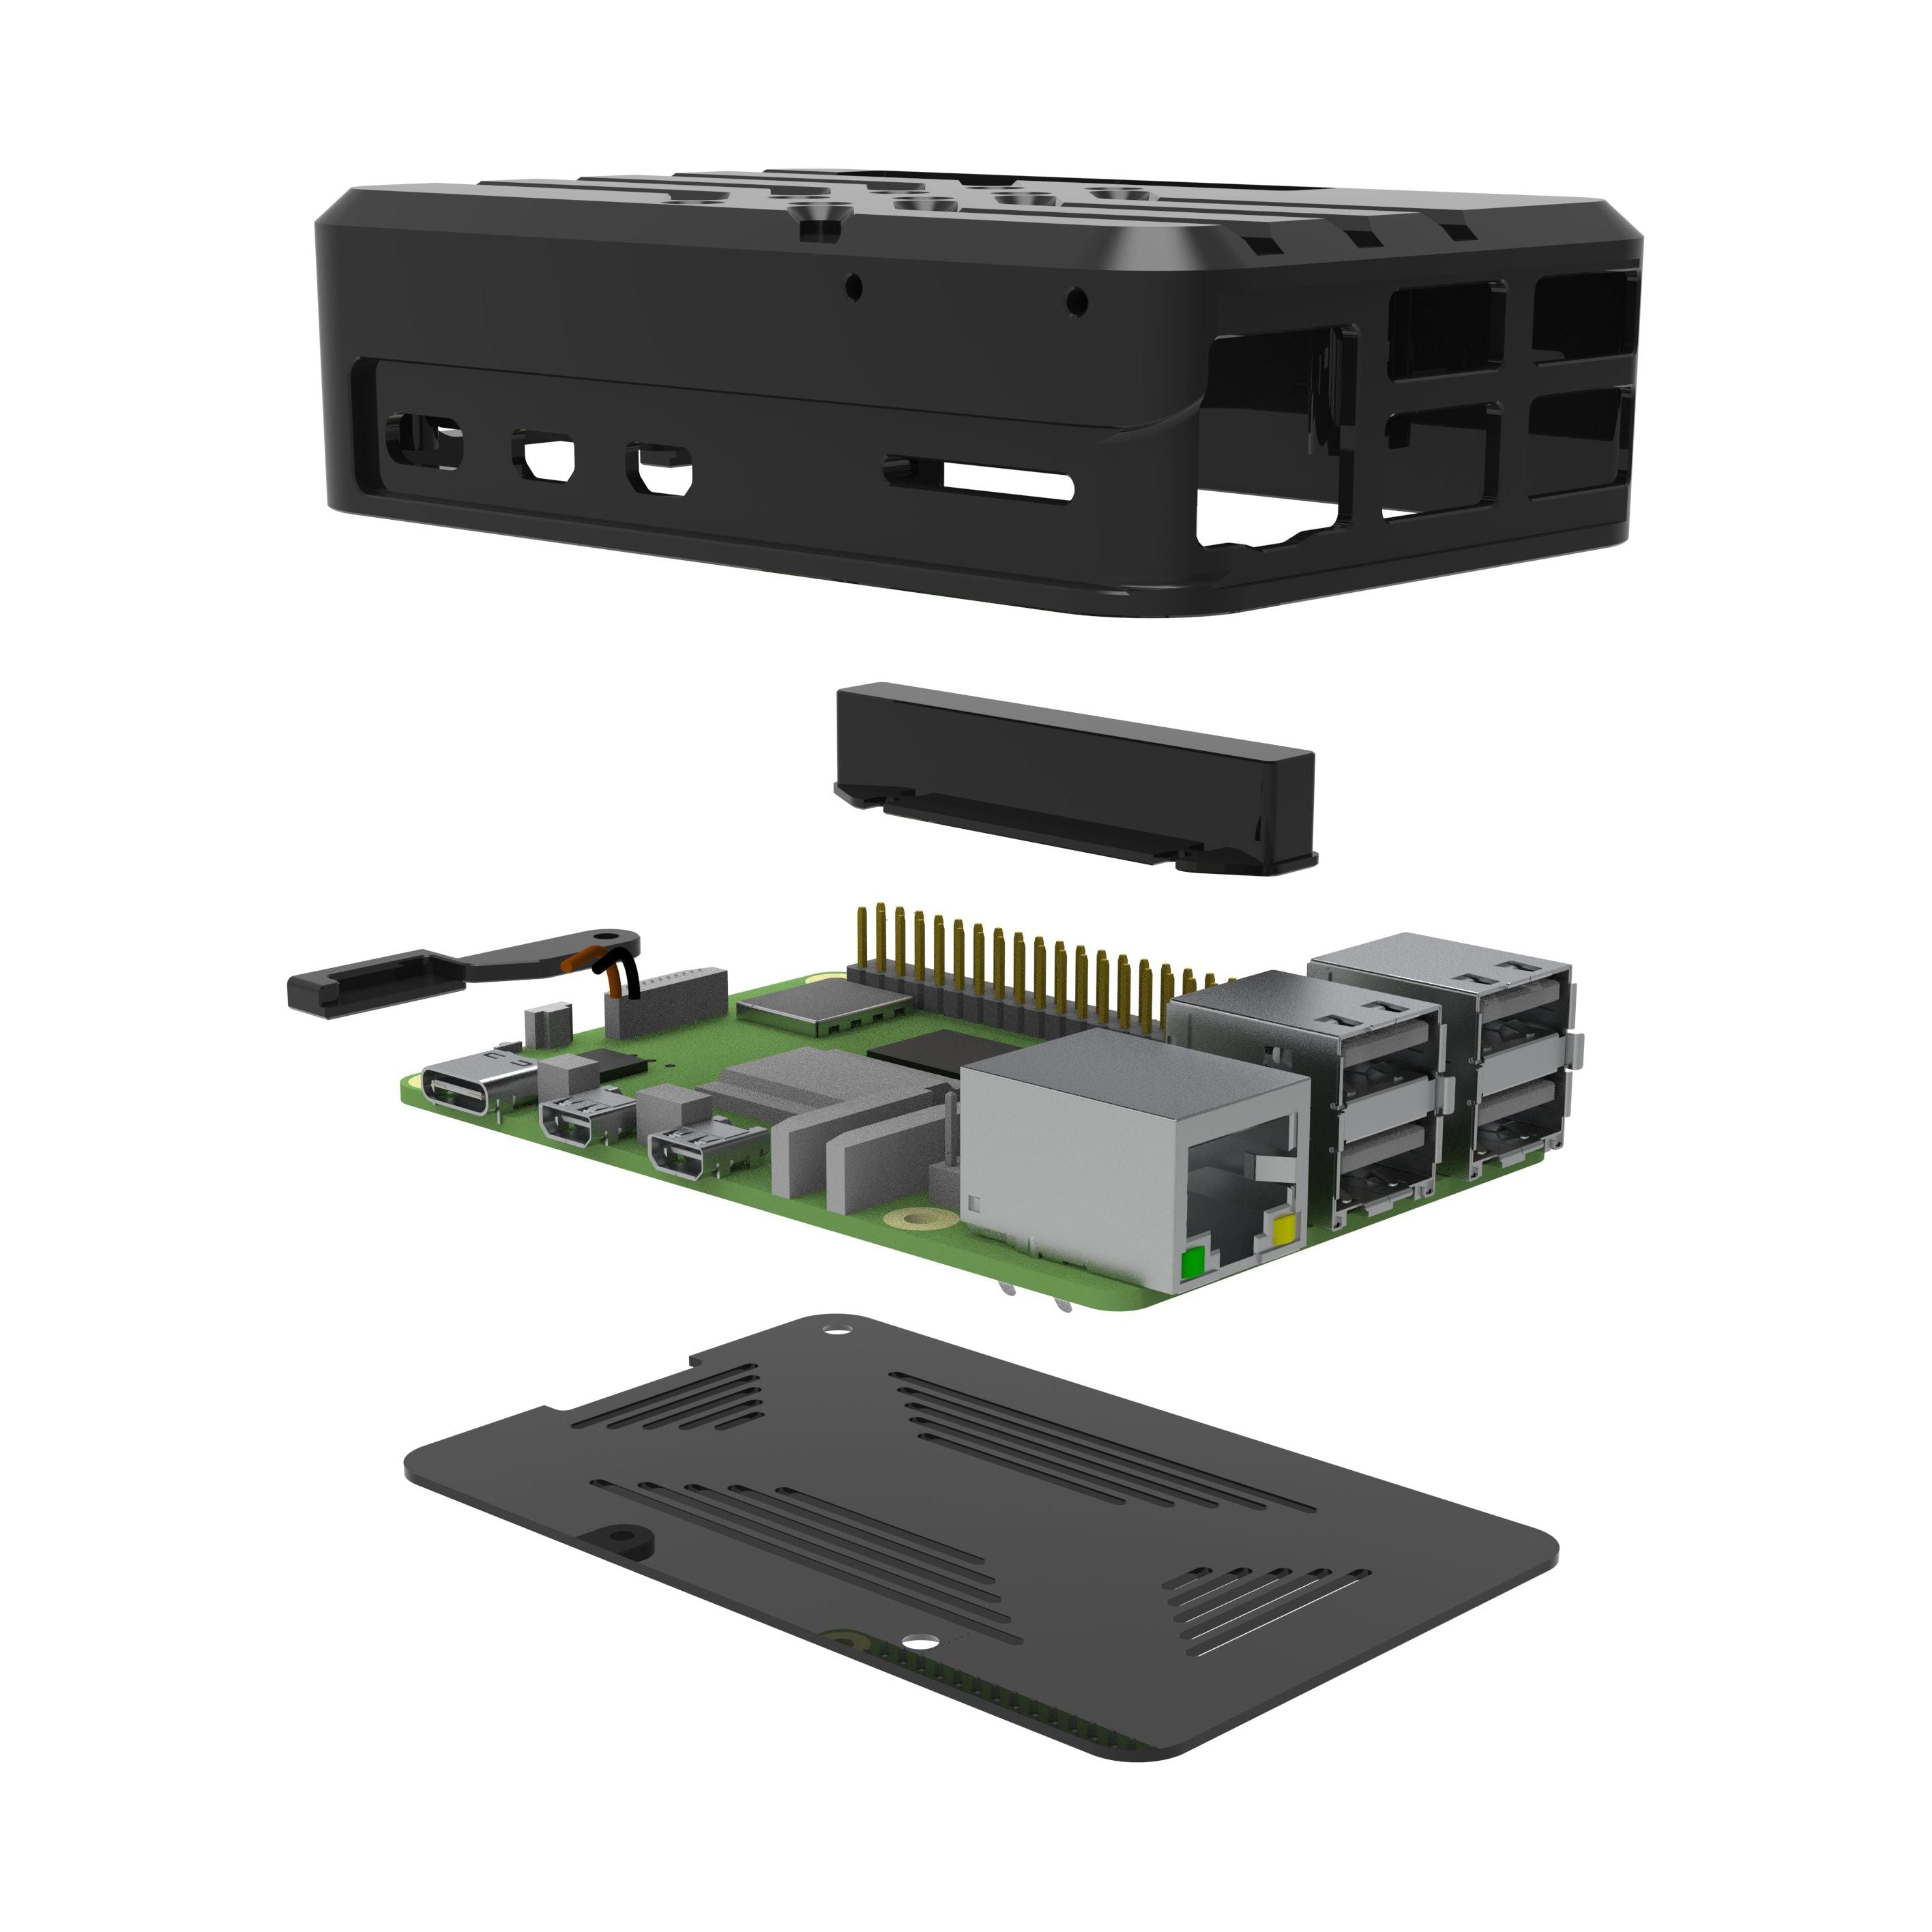 Vilros Duo Deluxe Raspberry Pi 5 Case- The Deluxe Passive and Active Cooling Case for Pi 5